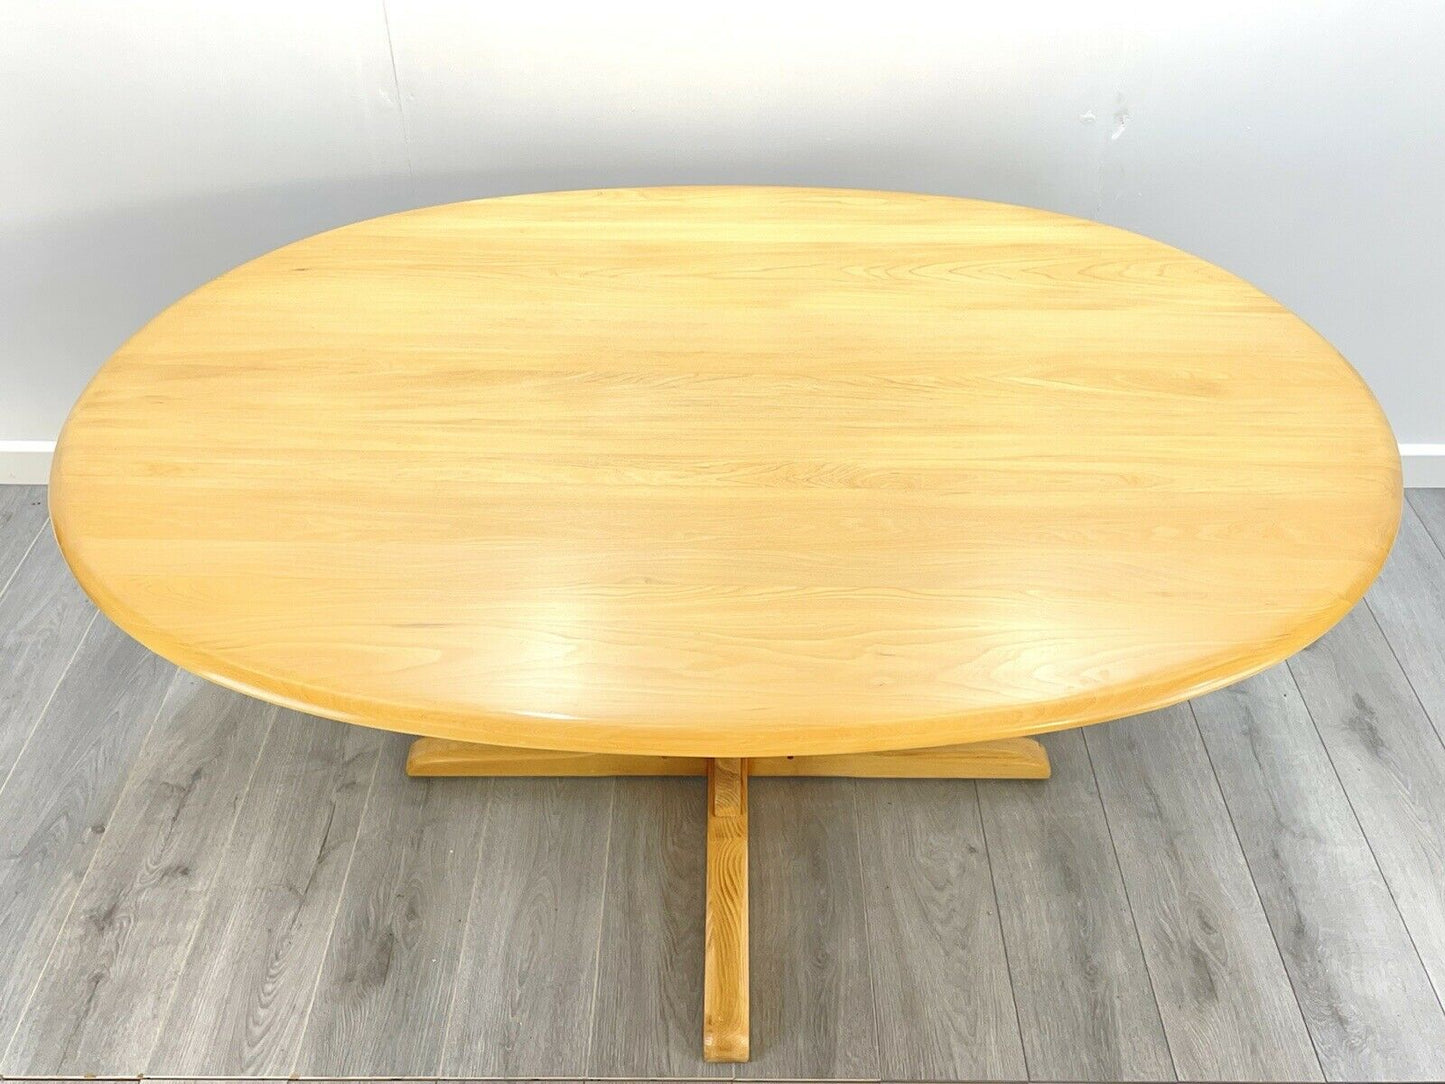 Ercol Southwold, Vintage Light Elm Oval Dining Table